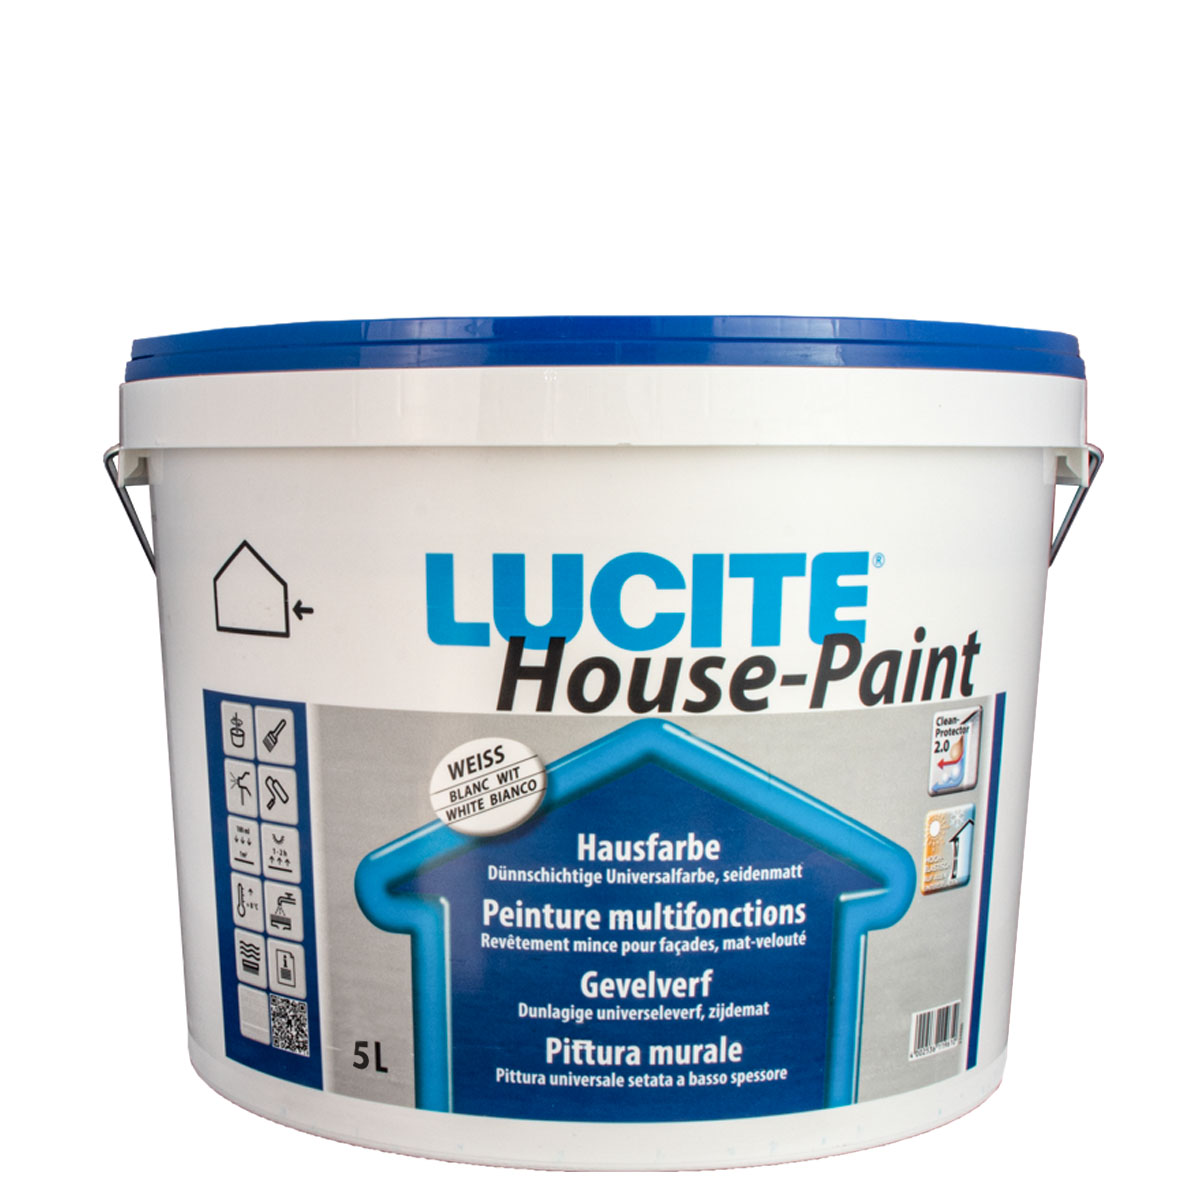 Lucite House Paint 5L weiss 1000T ,Hausfarbe, Fassadenfarbe